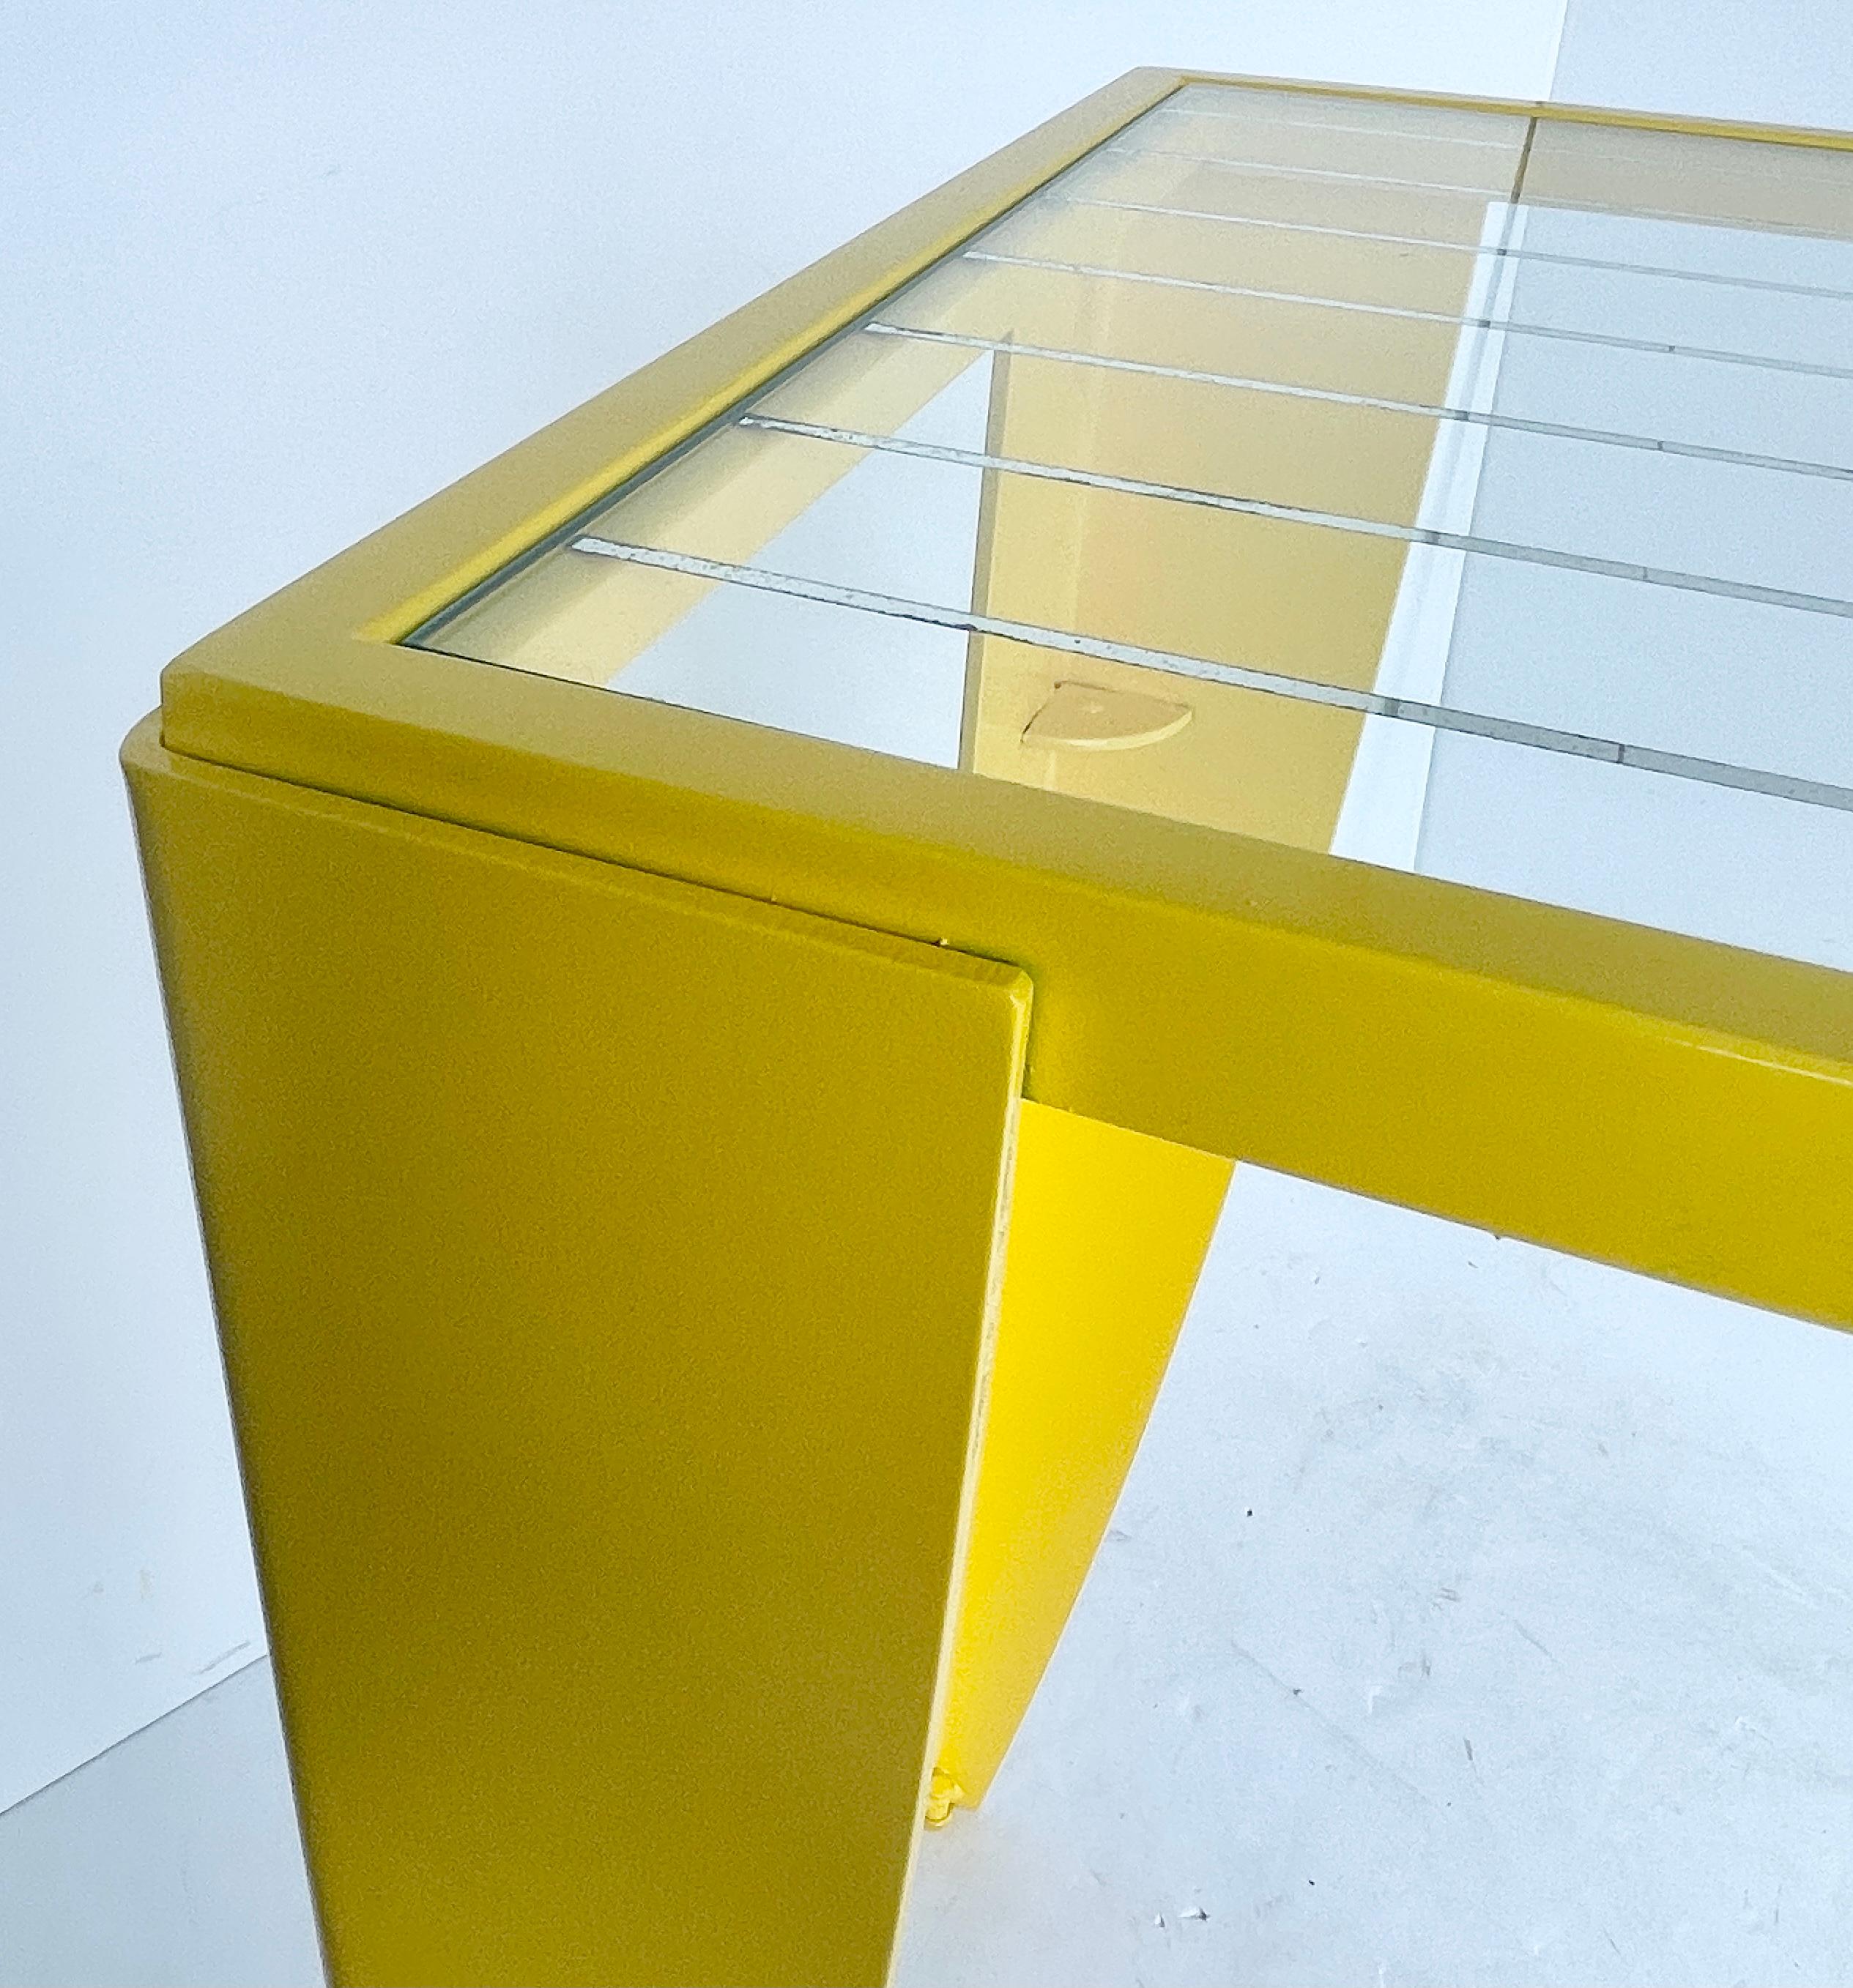 Mid-20th Century Italian Console Table with Glass Top, Powder Coated Yellow, Mid-Century Modern